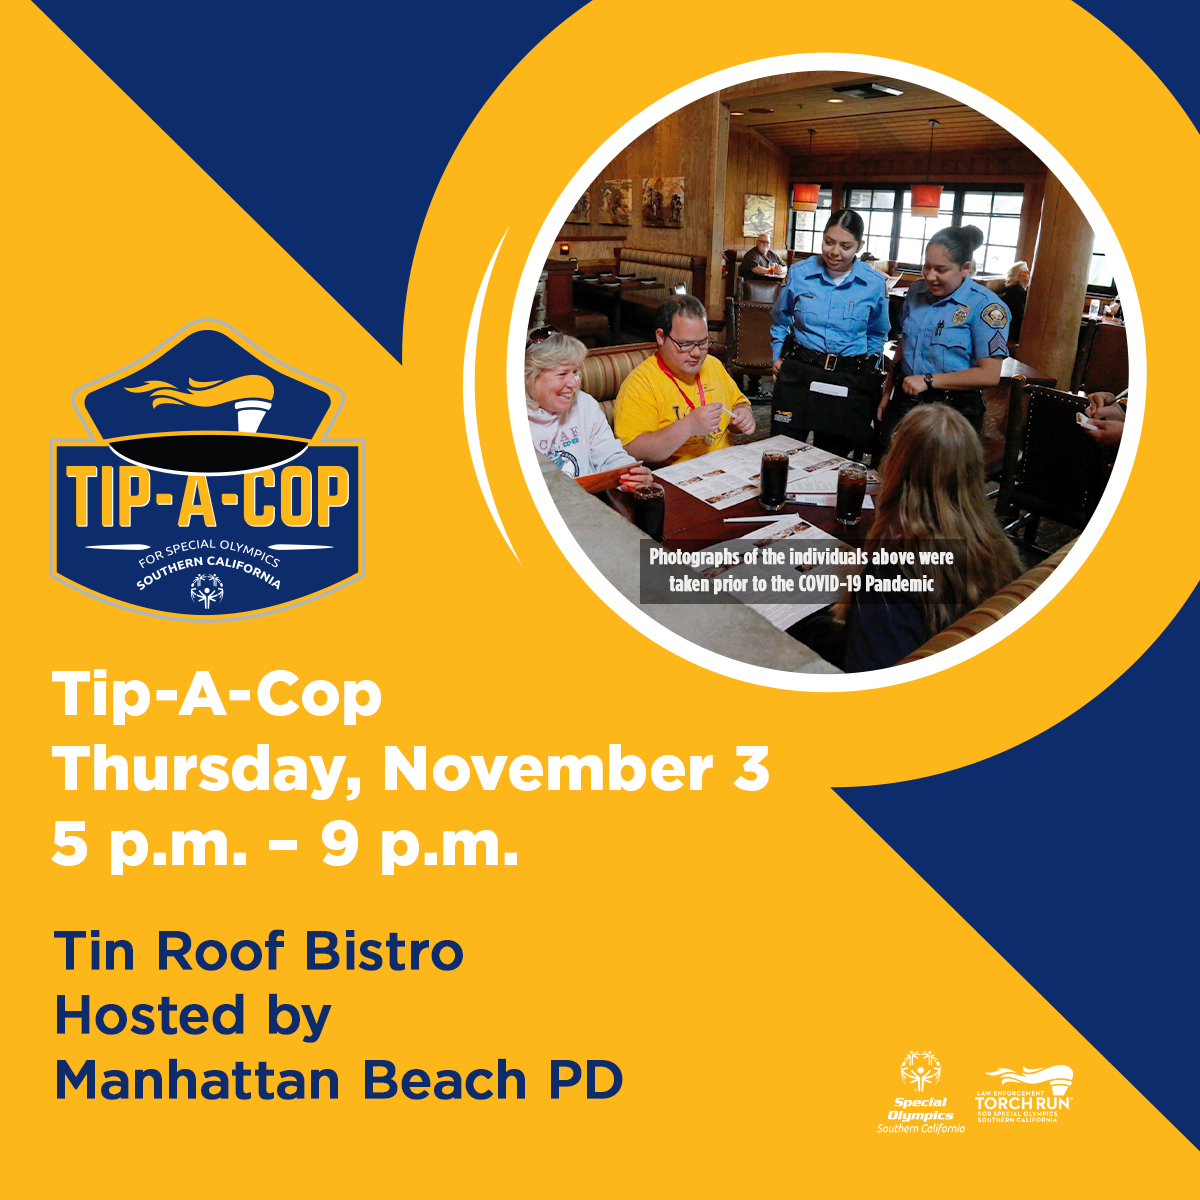 We hope to see you at Thursday's Tip-A-Cop!! We'll be at Tin Roof Bistro with @manhattanbchpd. 👮‍♀️🍝🥗 Learn More: sosc.org/events/?cgid=1… #LETR4SOSC #TipACop #ManhattanBeach